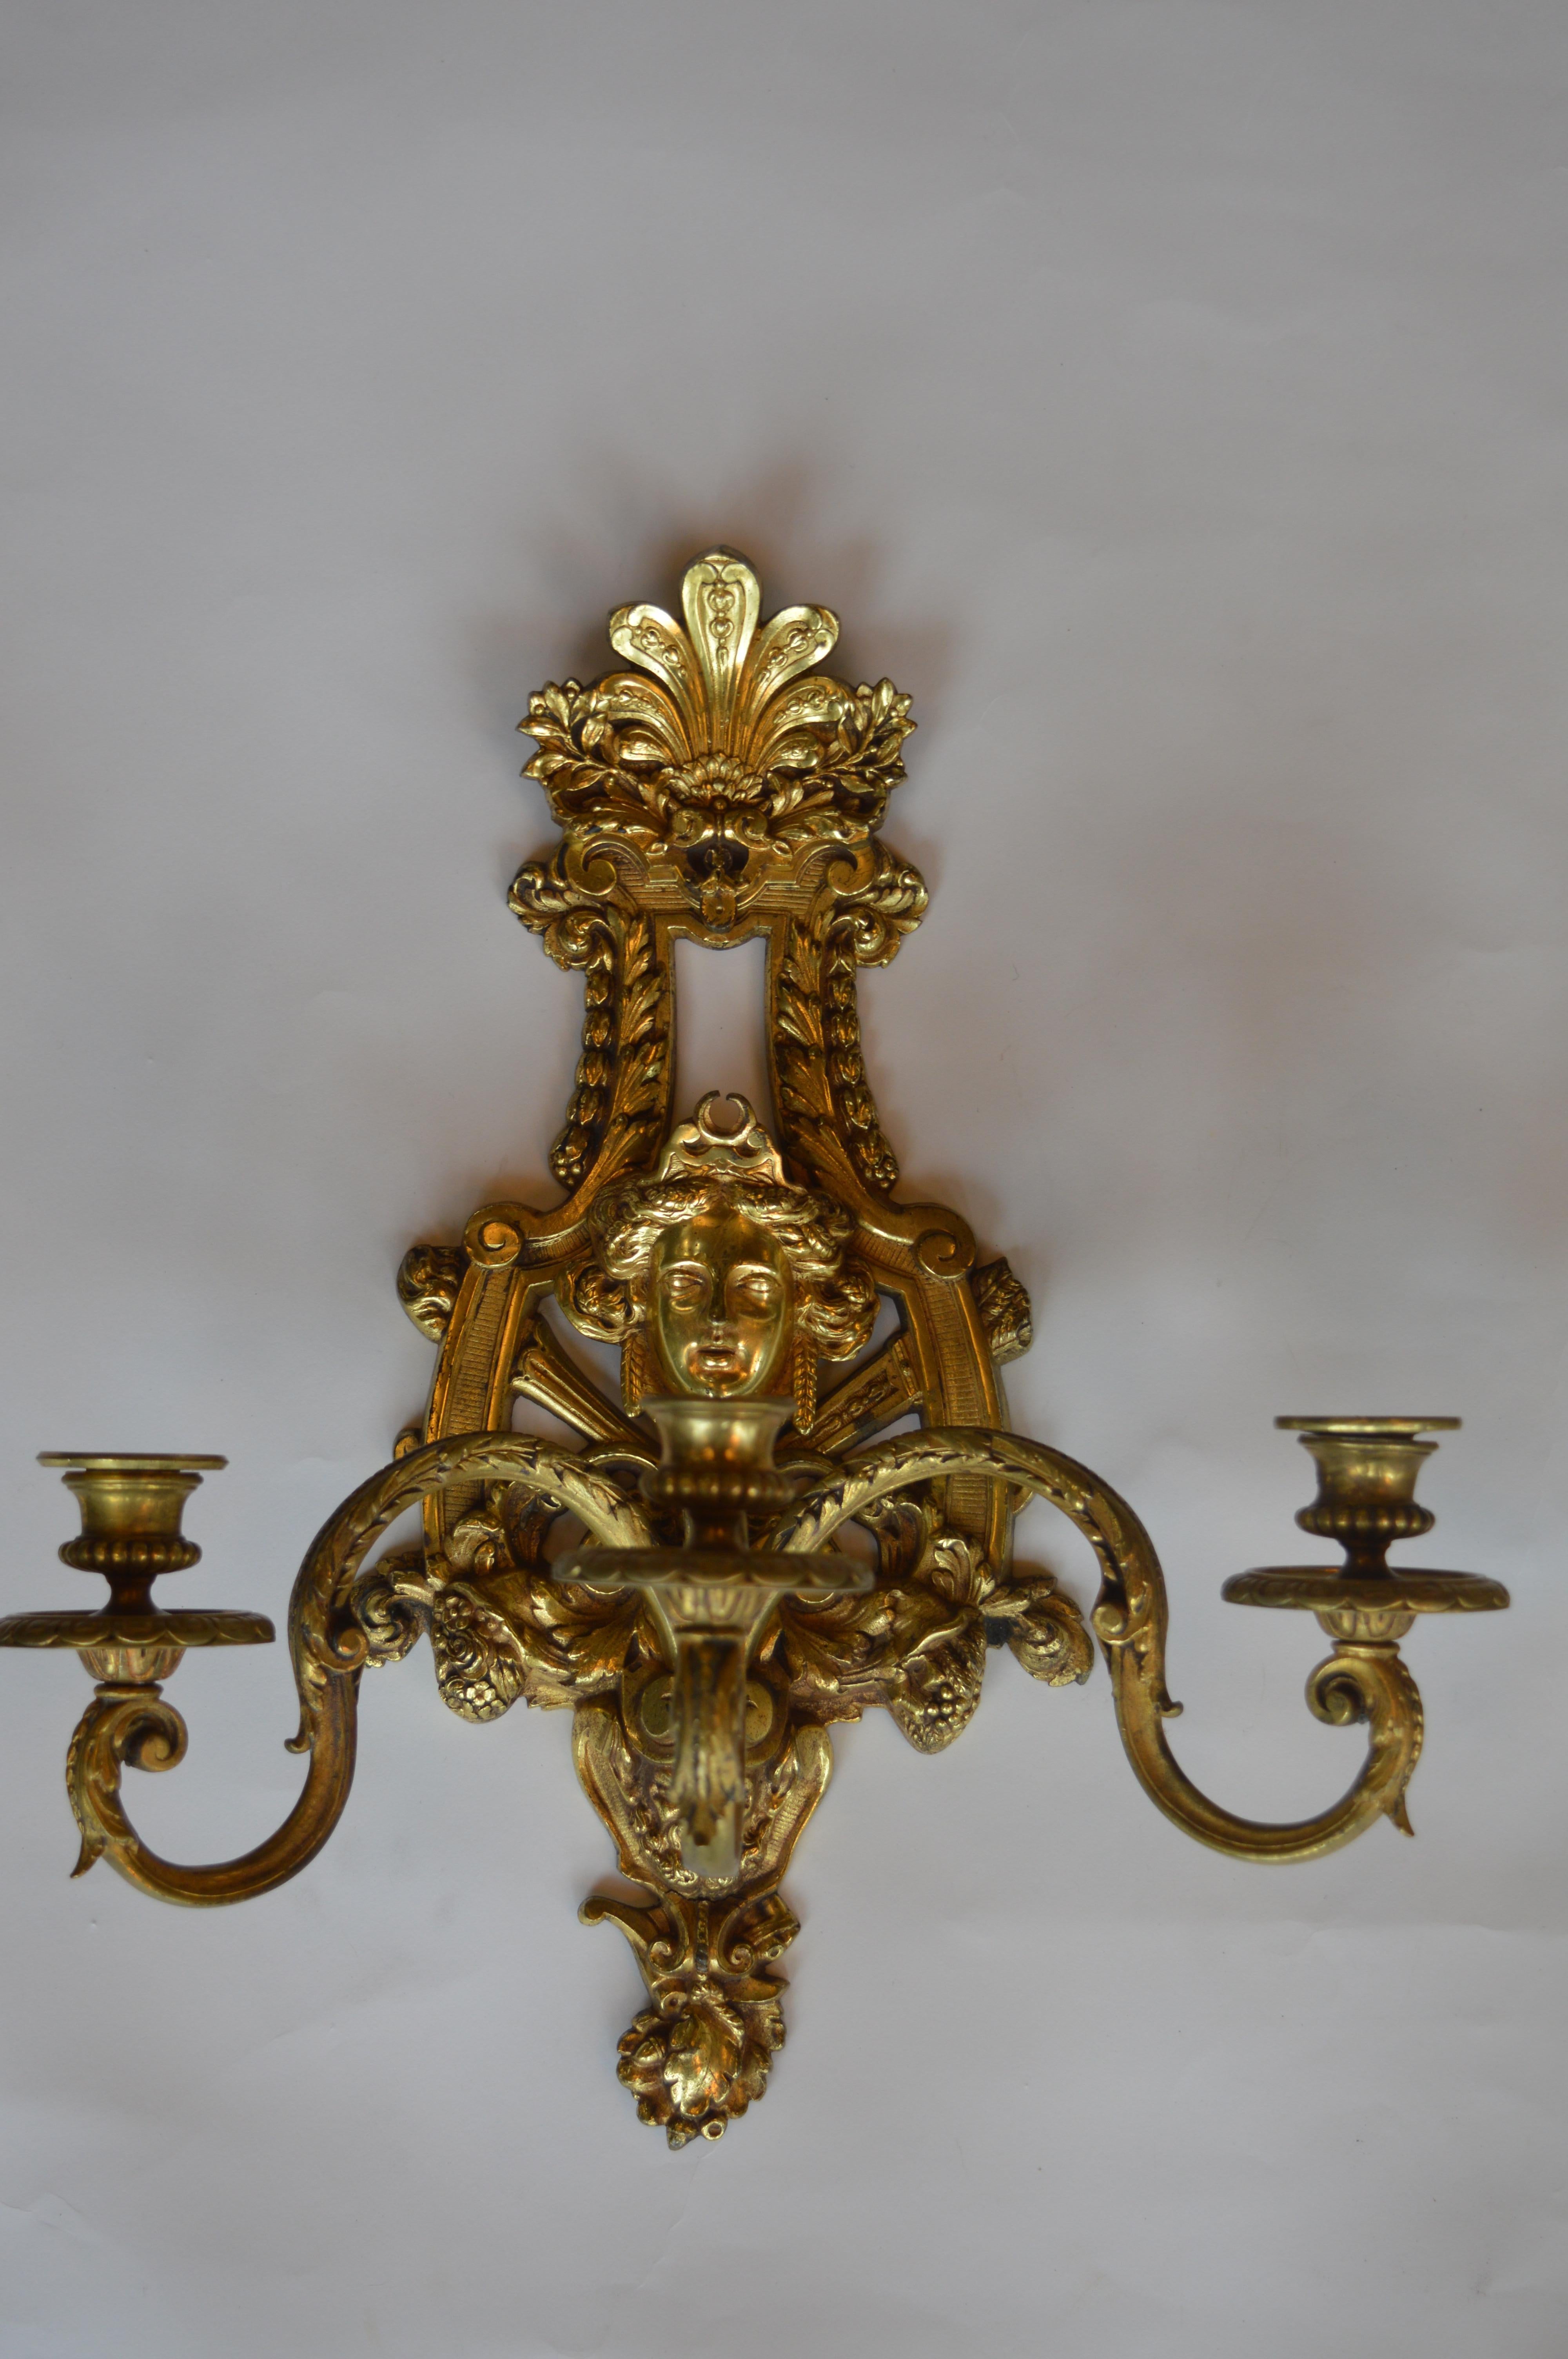 19th century Empire style bronze gold plated sconces.